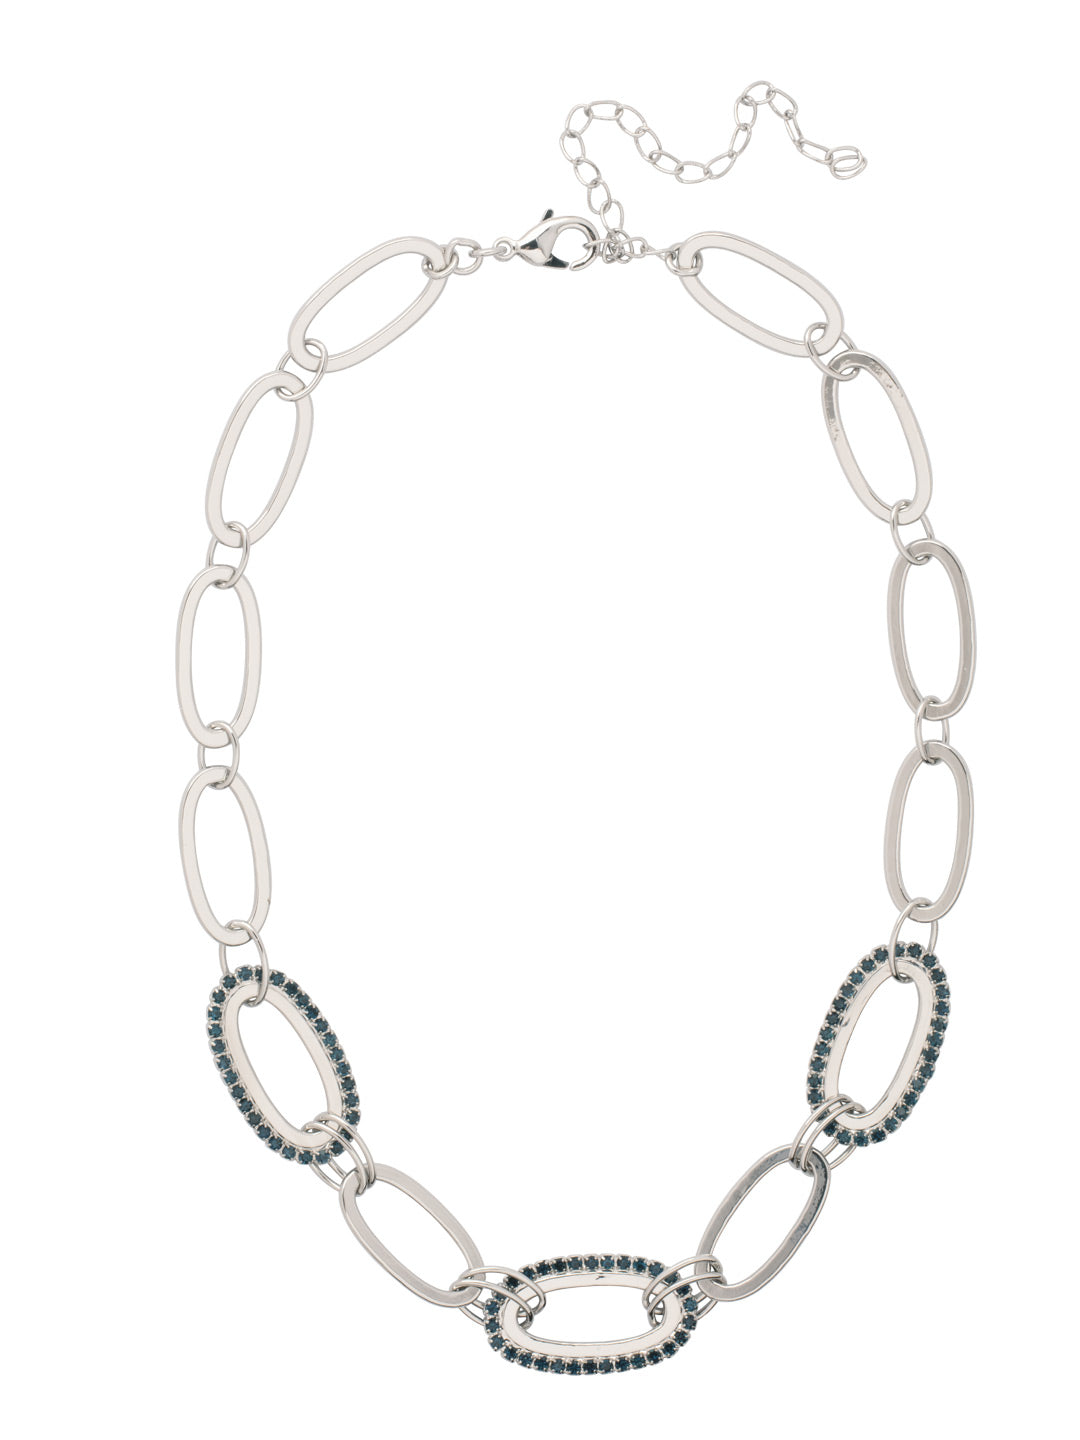 Tori Tennis Necklace - NFL44PDASP - <p>The Tori Tennis Necklace features alternating rhinestone and metal chain links on an adjustable chain secured with a lobster claw clasp. From Sorrelli's Aspen SKY collection in our Palladium finish.</p>